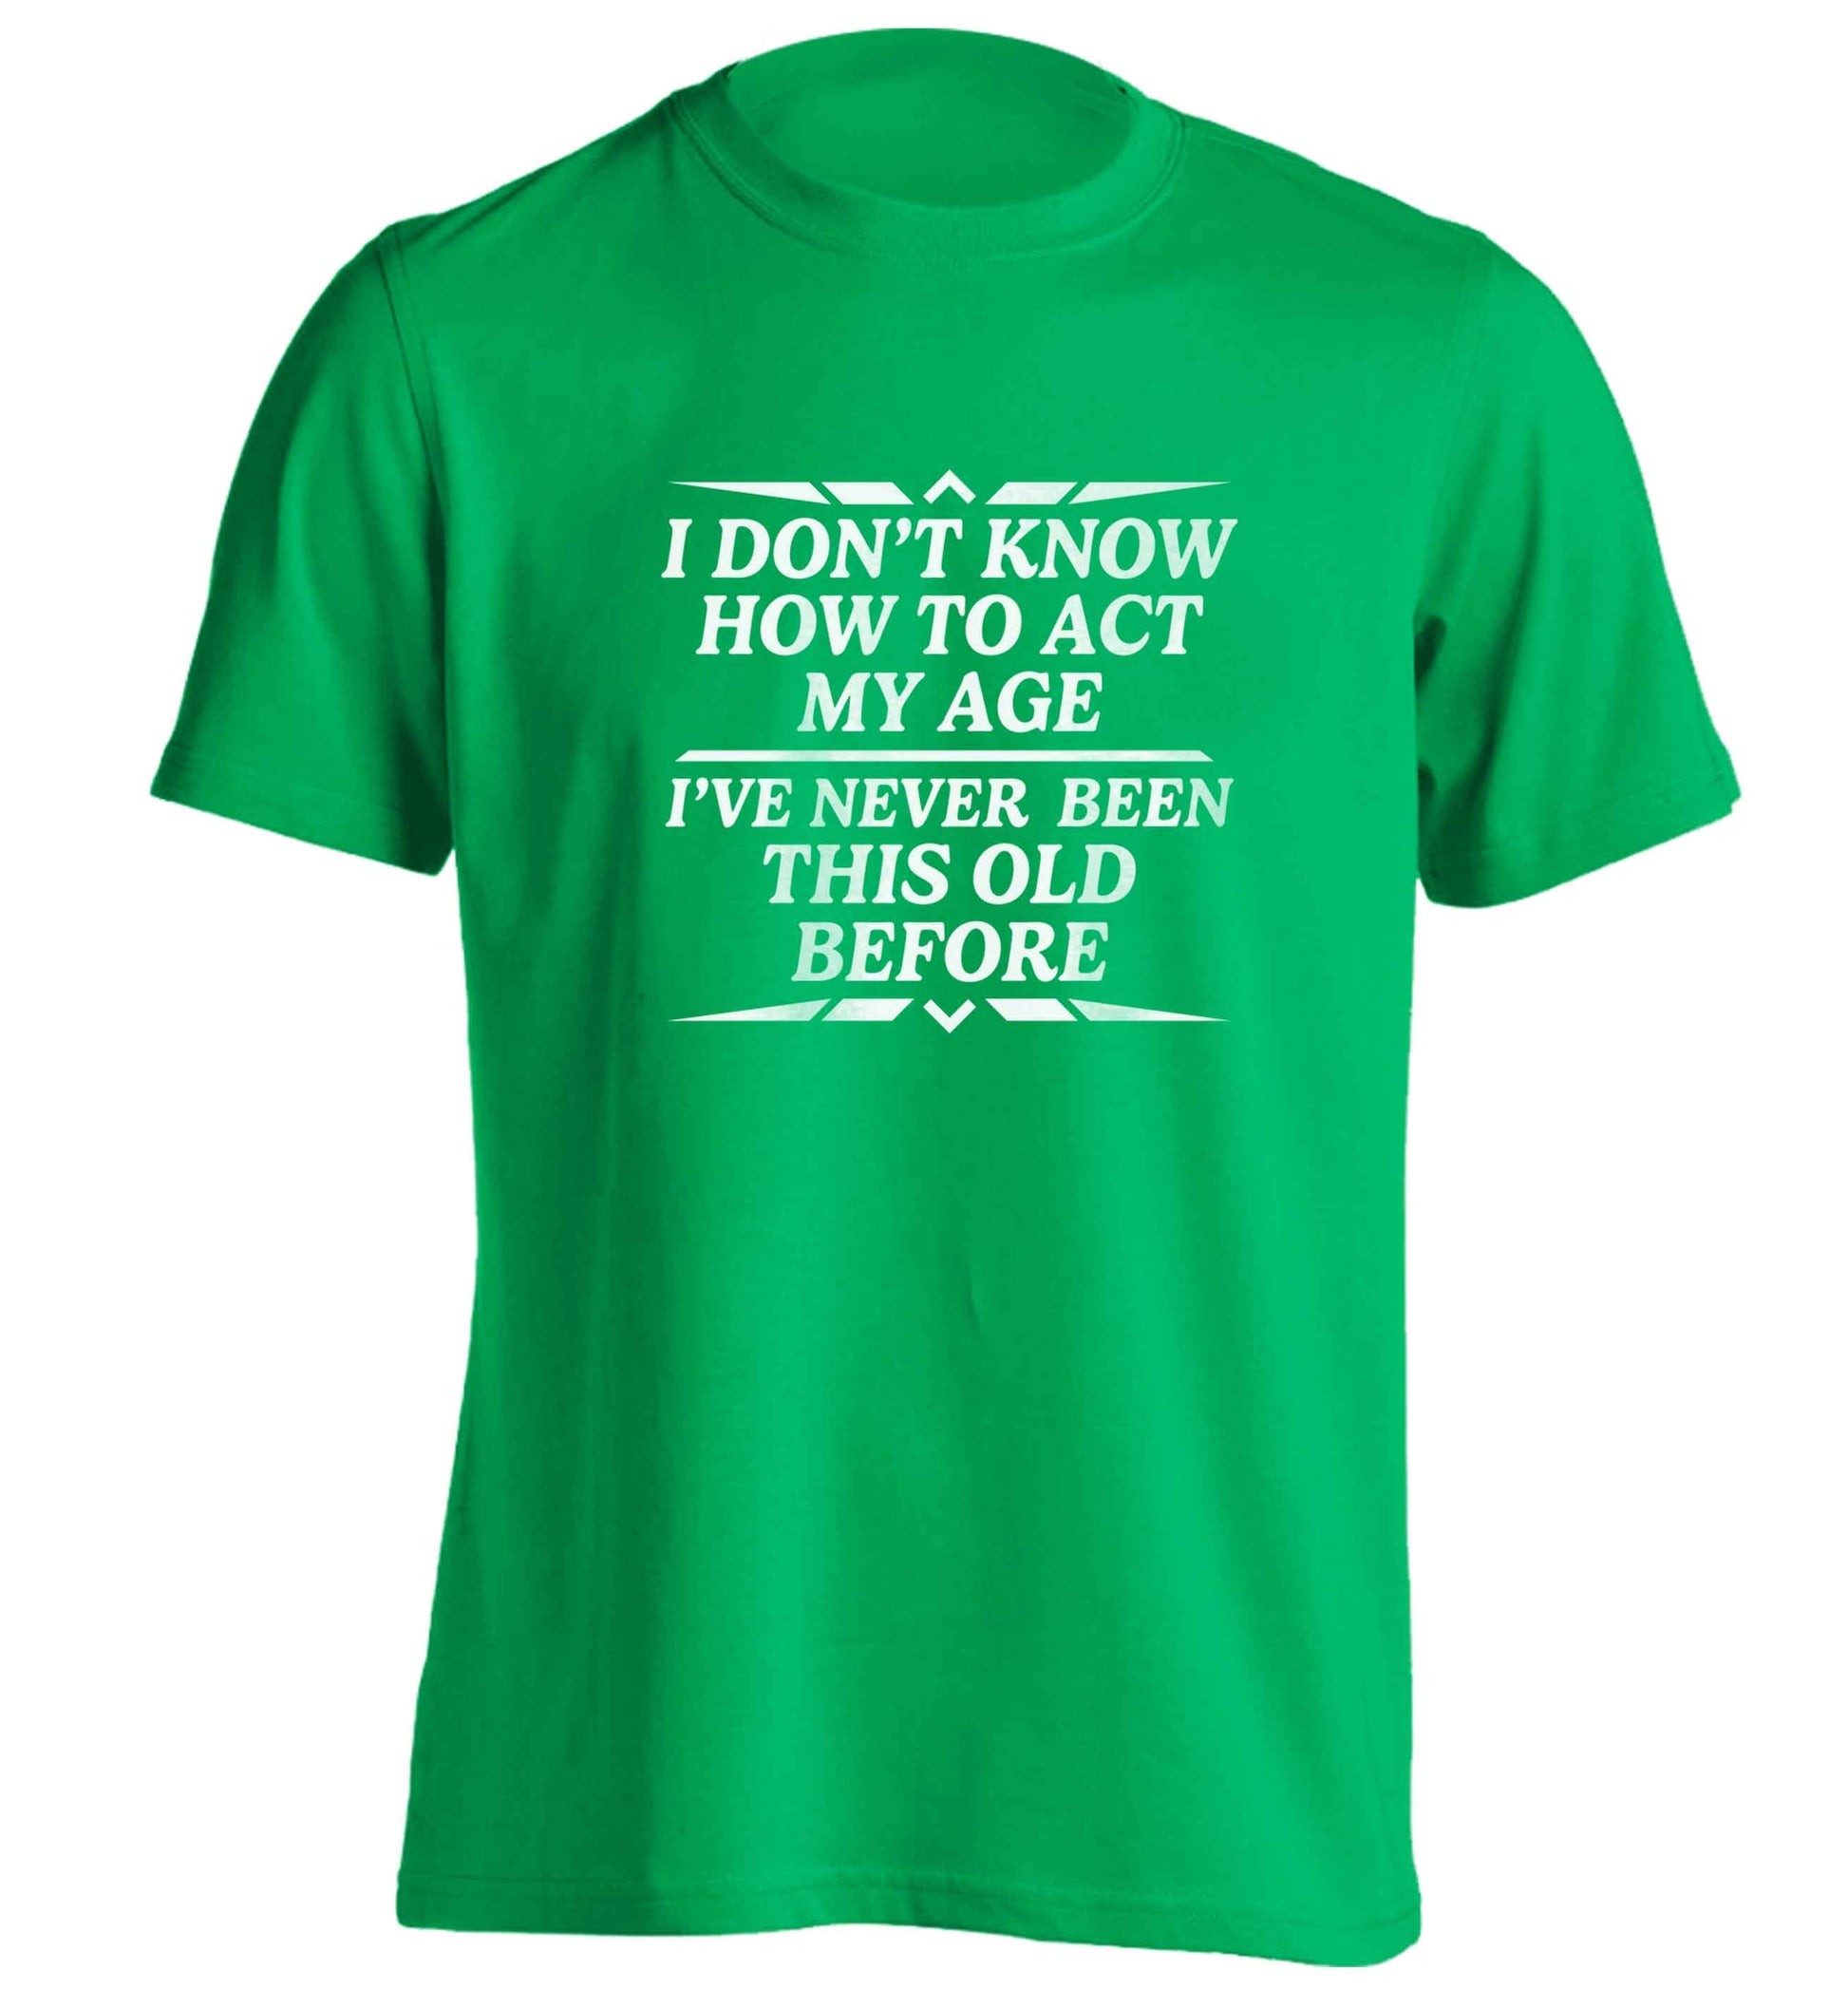 I don't know how to act my age I've never been this old before adults unisex green Tshirt 2XL